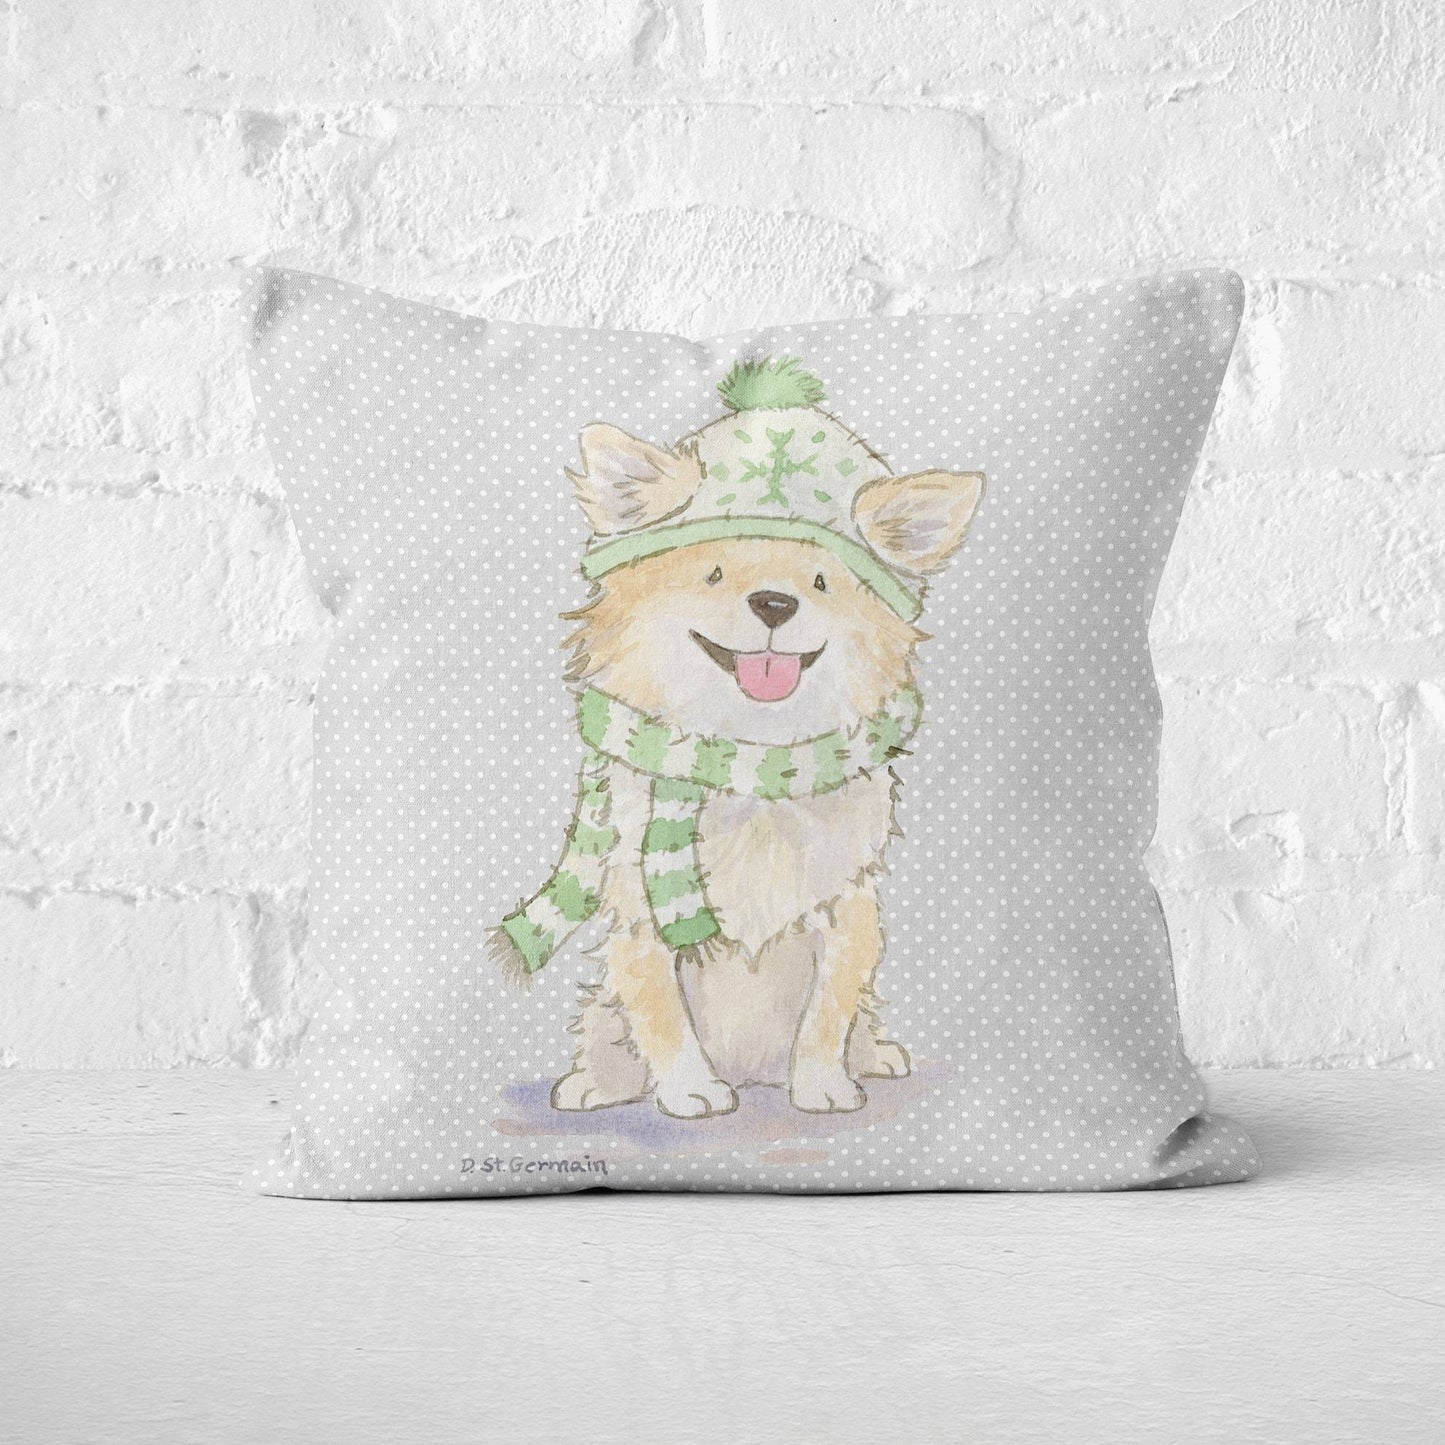 Chihuahua Holiday Pillow Cover, Chihuahua Gift, Chihuahua Pillow Cover, Chihuahua Lover, Dog Lover Gift, Christmas Throw Pillow, Long Haired